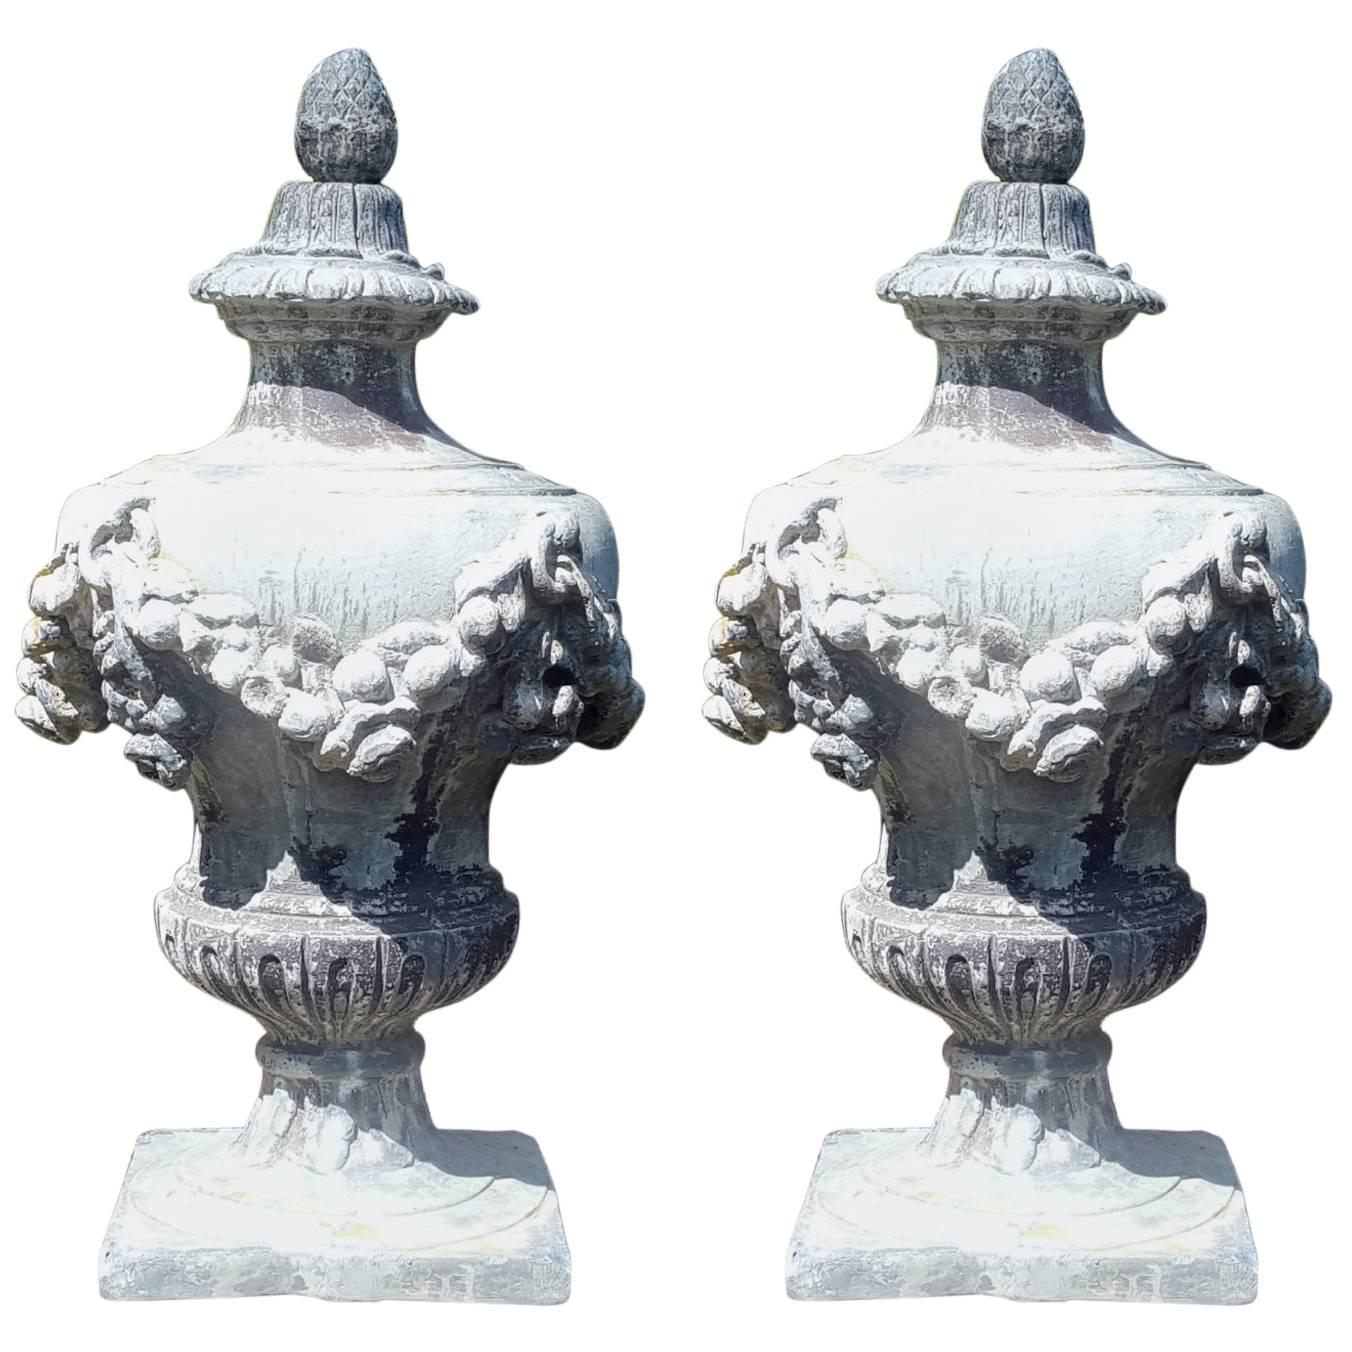 Pair of 18th Century Lead Urns/Finials For Sale